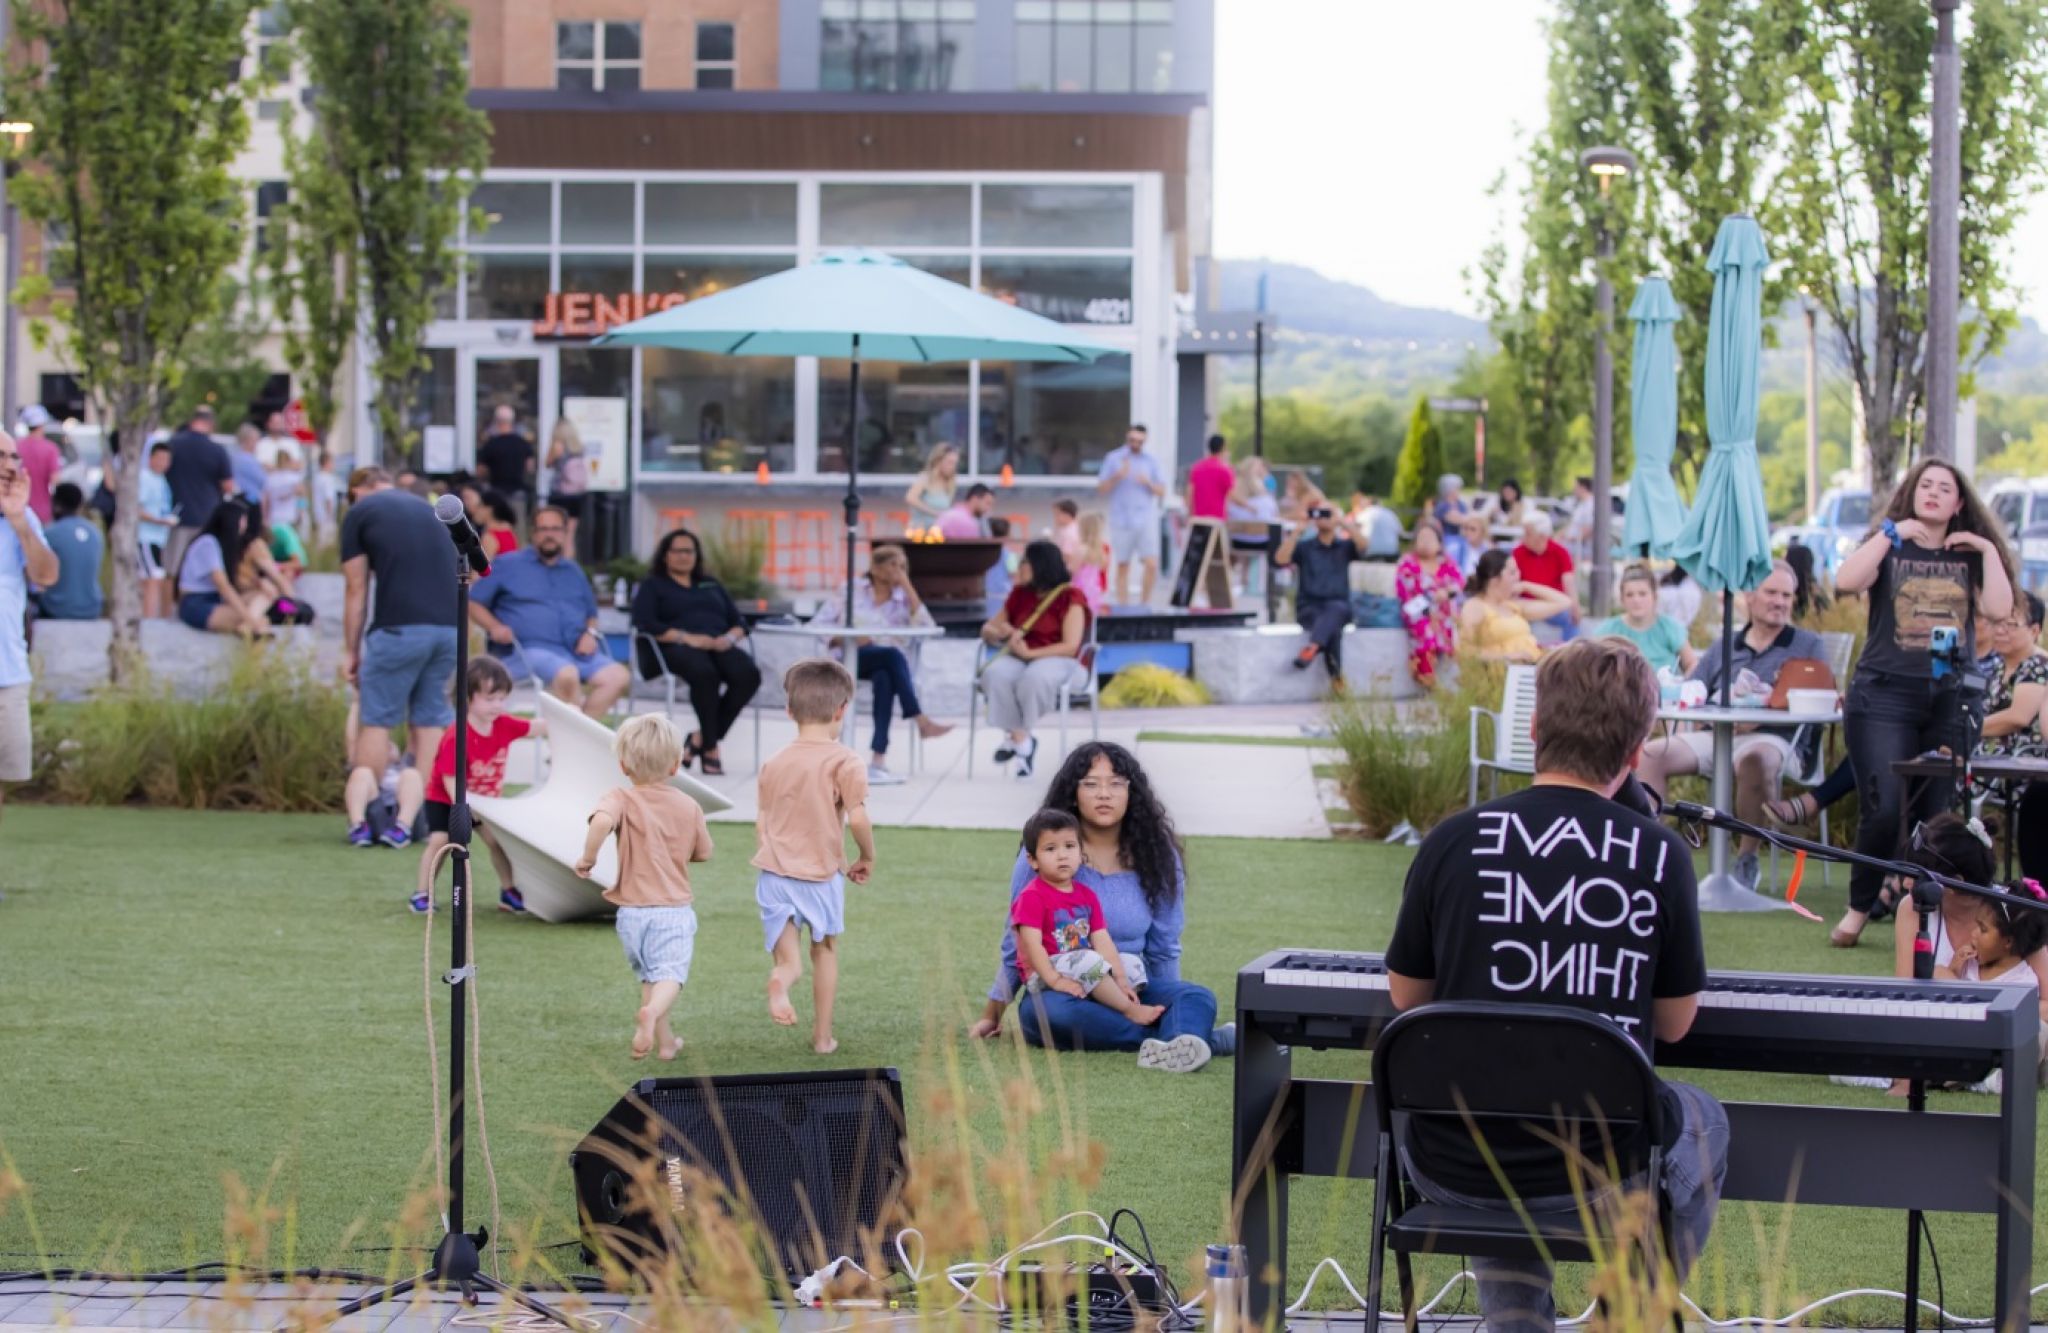 Group event on outdoor lawn in the McEwen Northside District